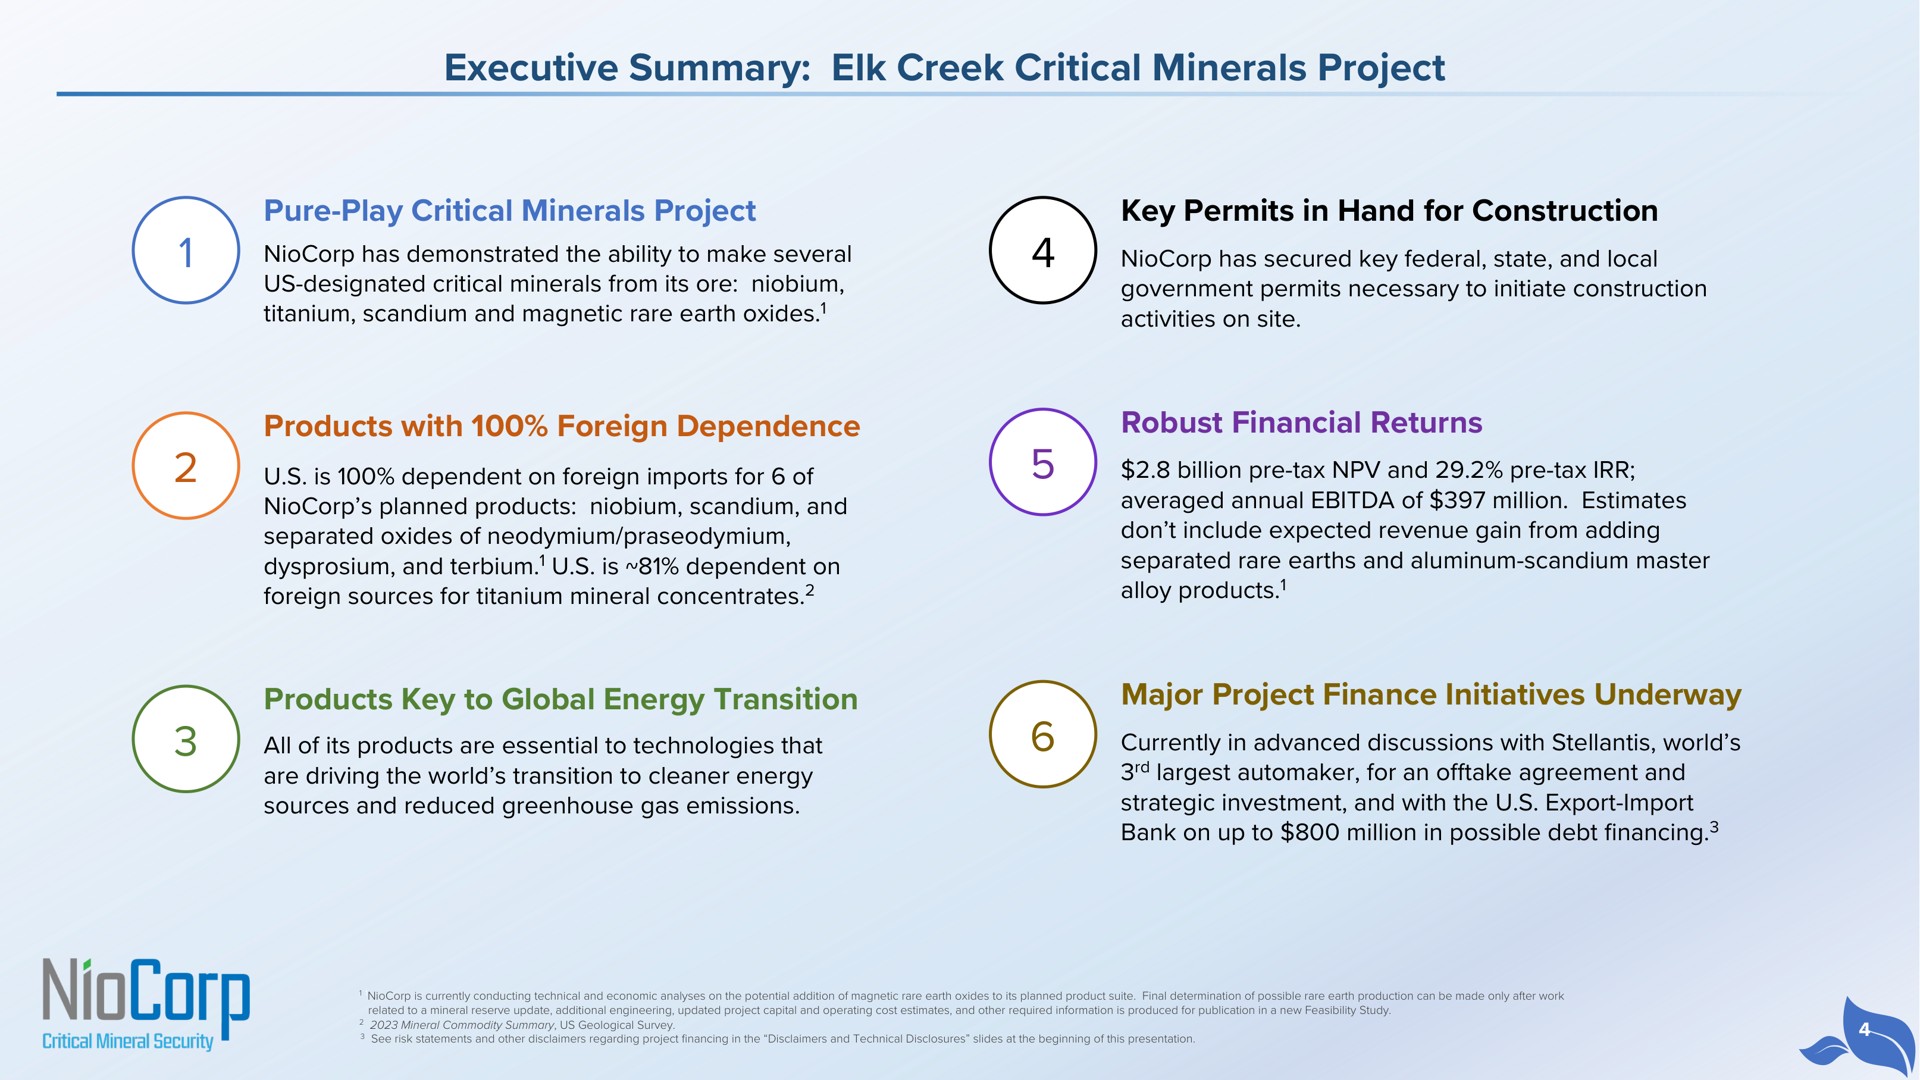 executive summary elk creek critical minerals project pure play critical minerals project products with foreign dependence products key to global energy transition key permits in hand for construction robust financial returns major project finance initiatives underway | NioCorp